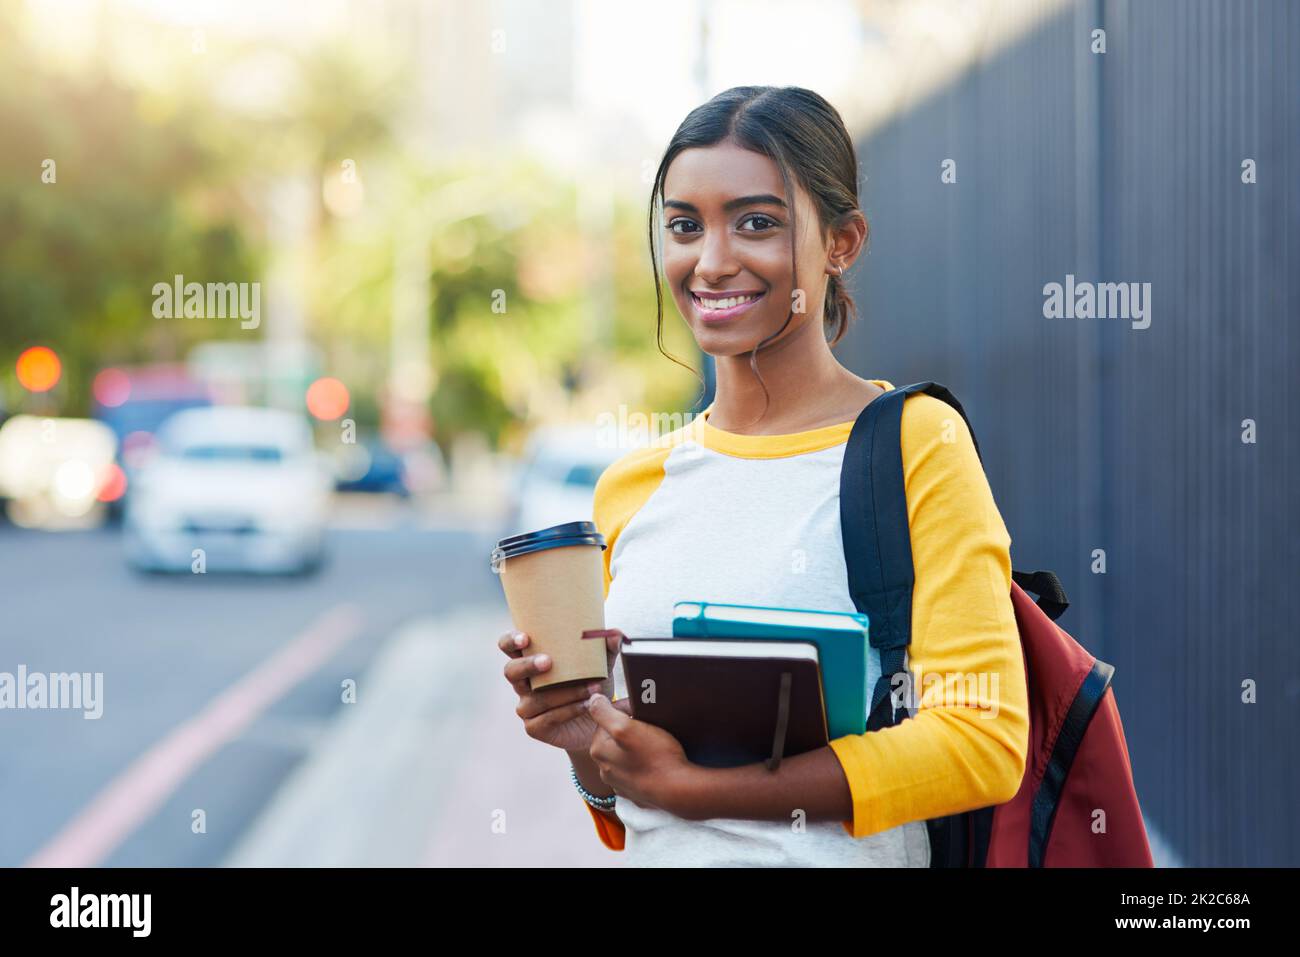 Ive got my books and coffee, Im ready for college. Cropped shot of a young female student commuting to college in the city. Stock Photo